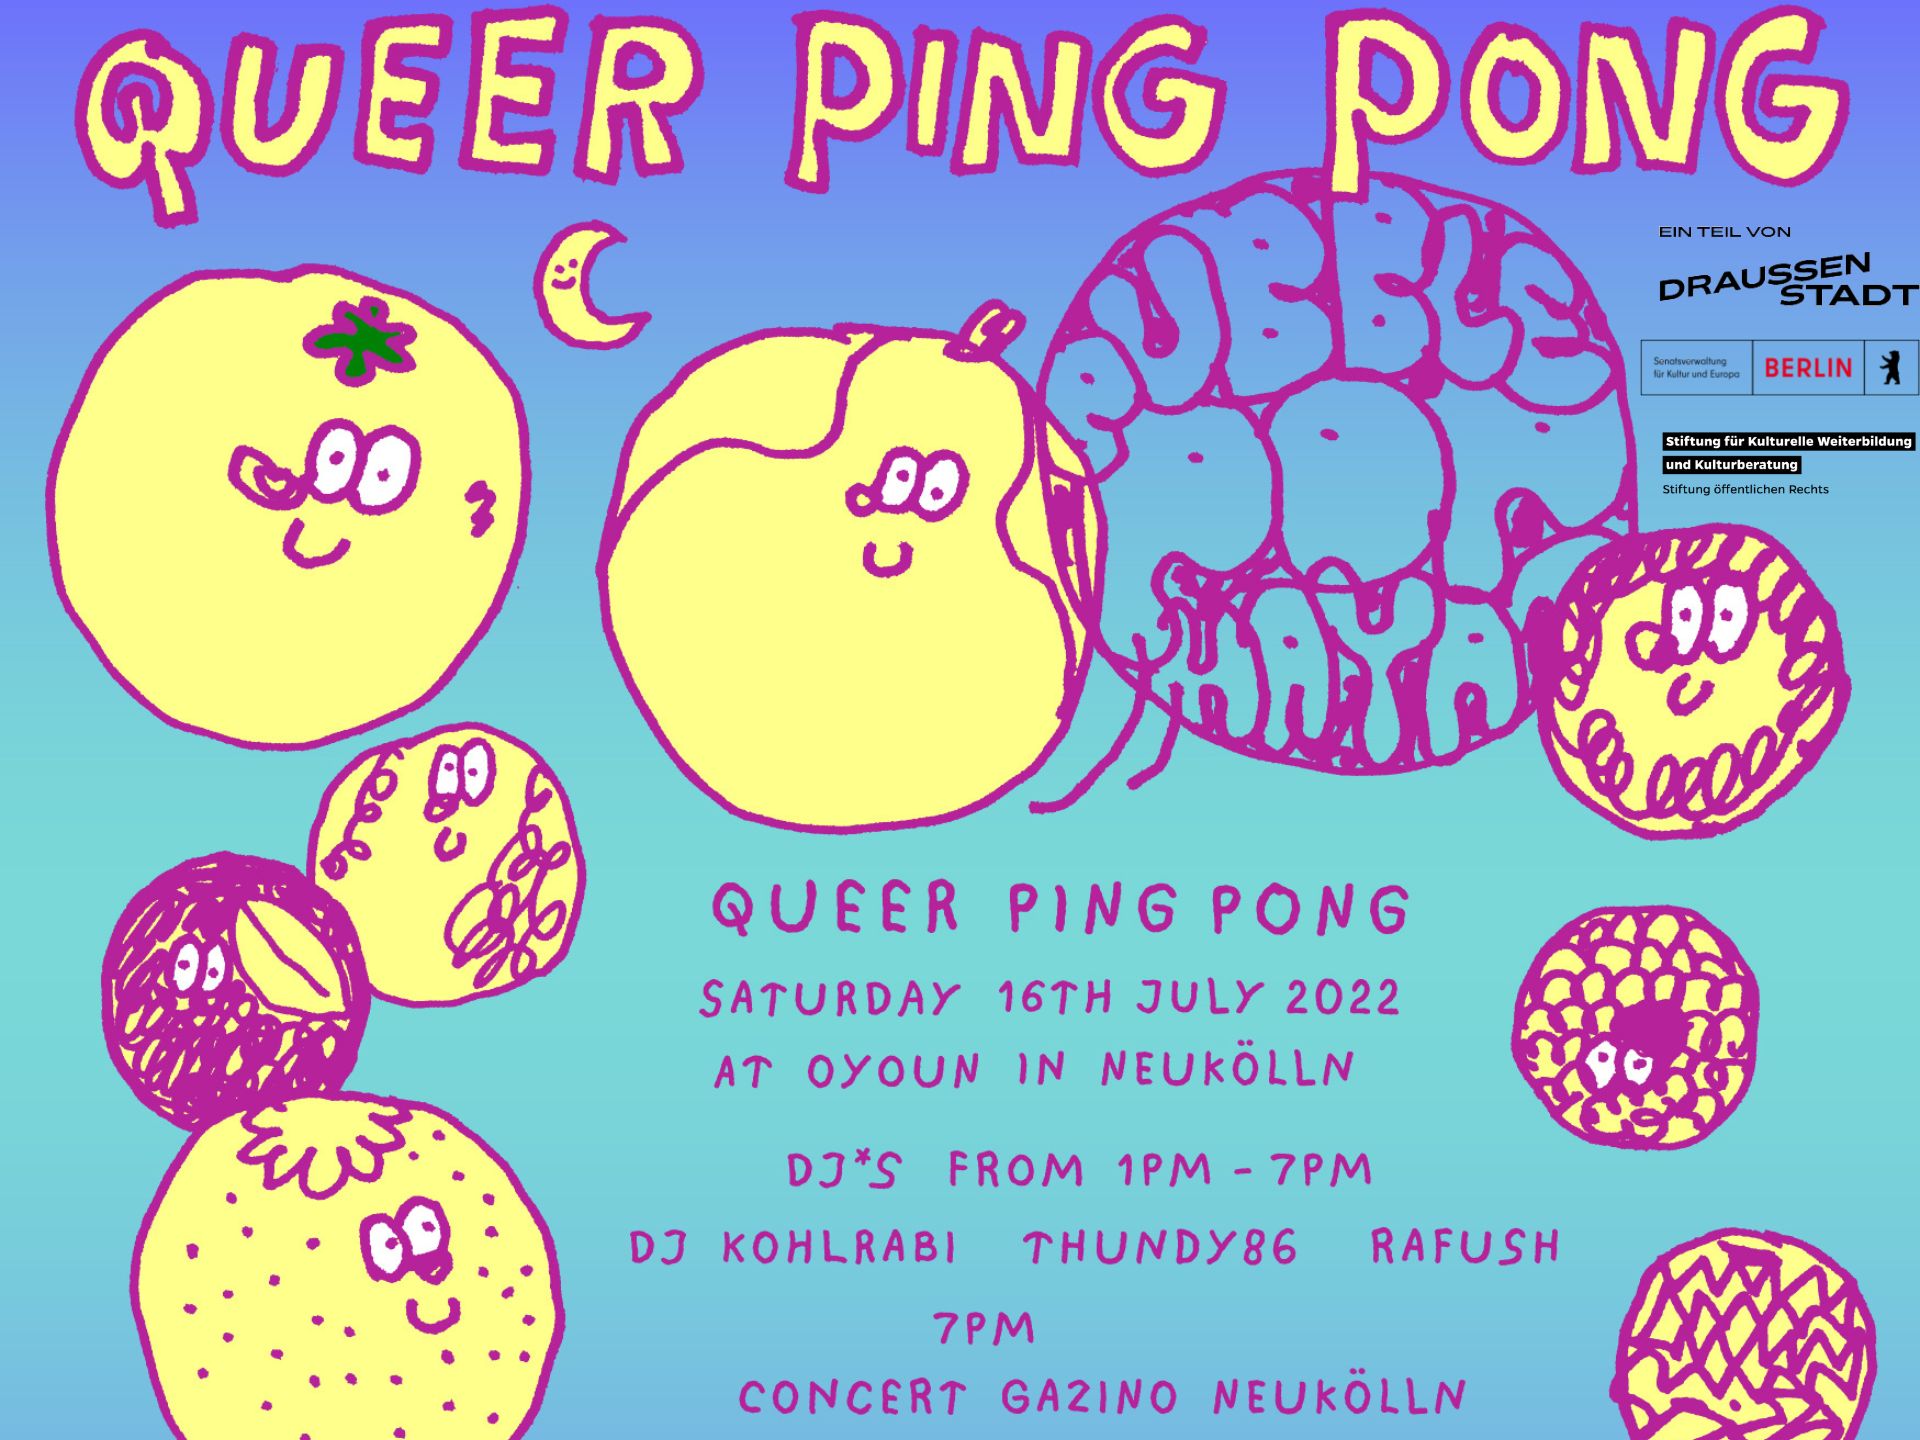 Queer Ping Pong